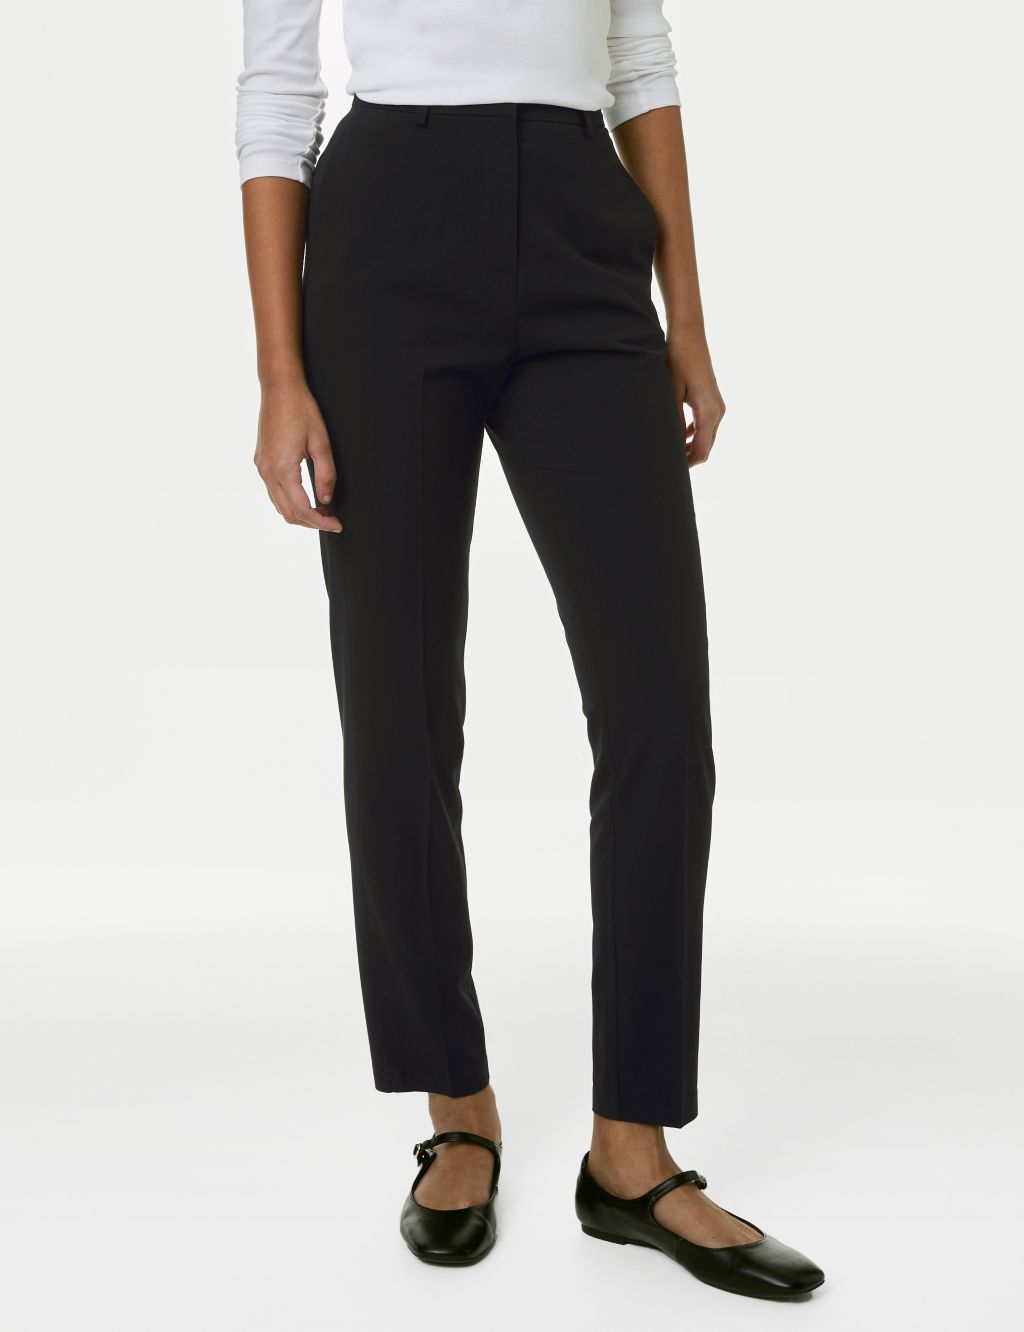 Slim Fit Ankle Grazer Trousers with Stretch image 3